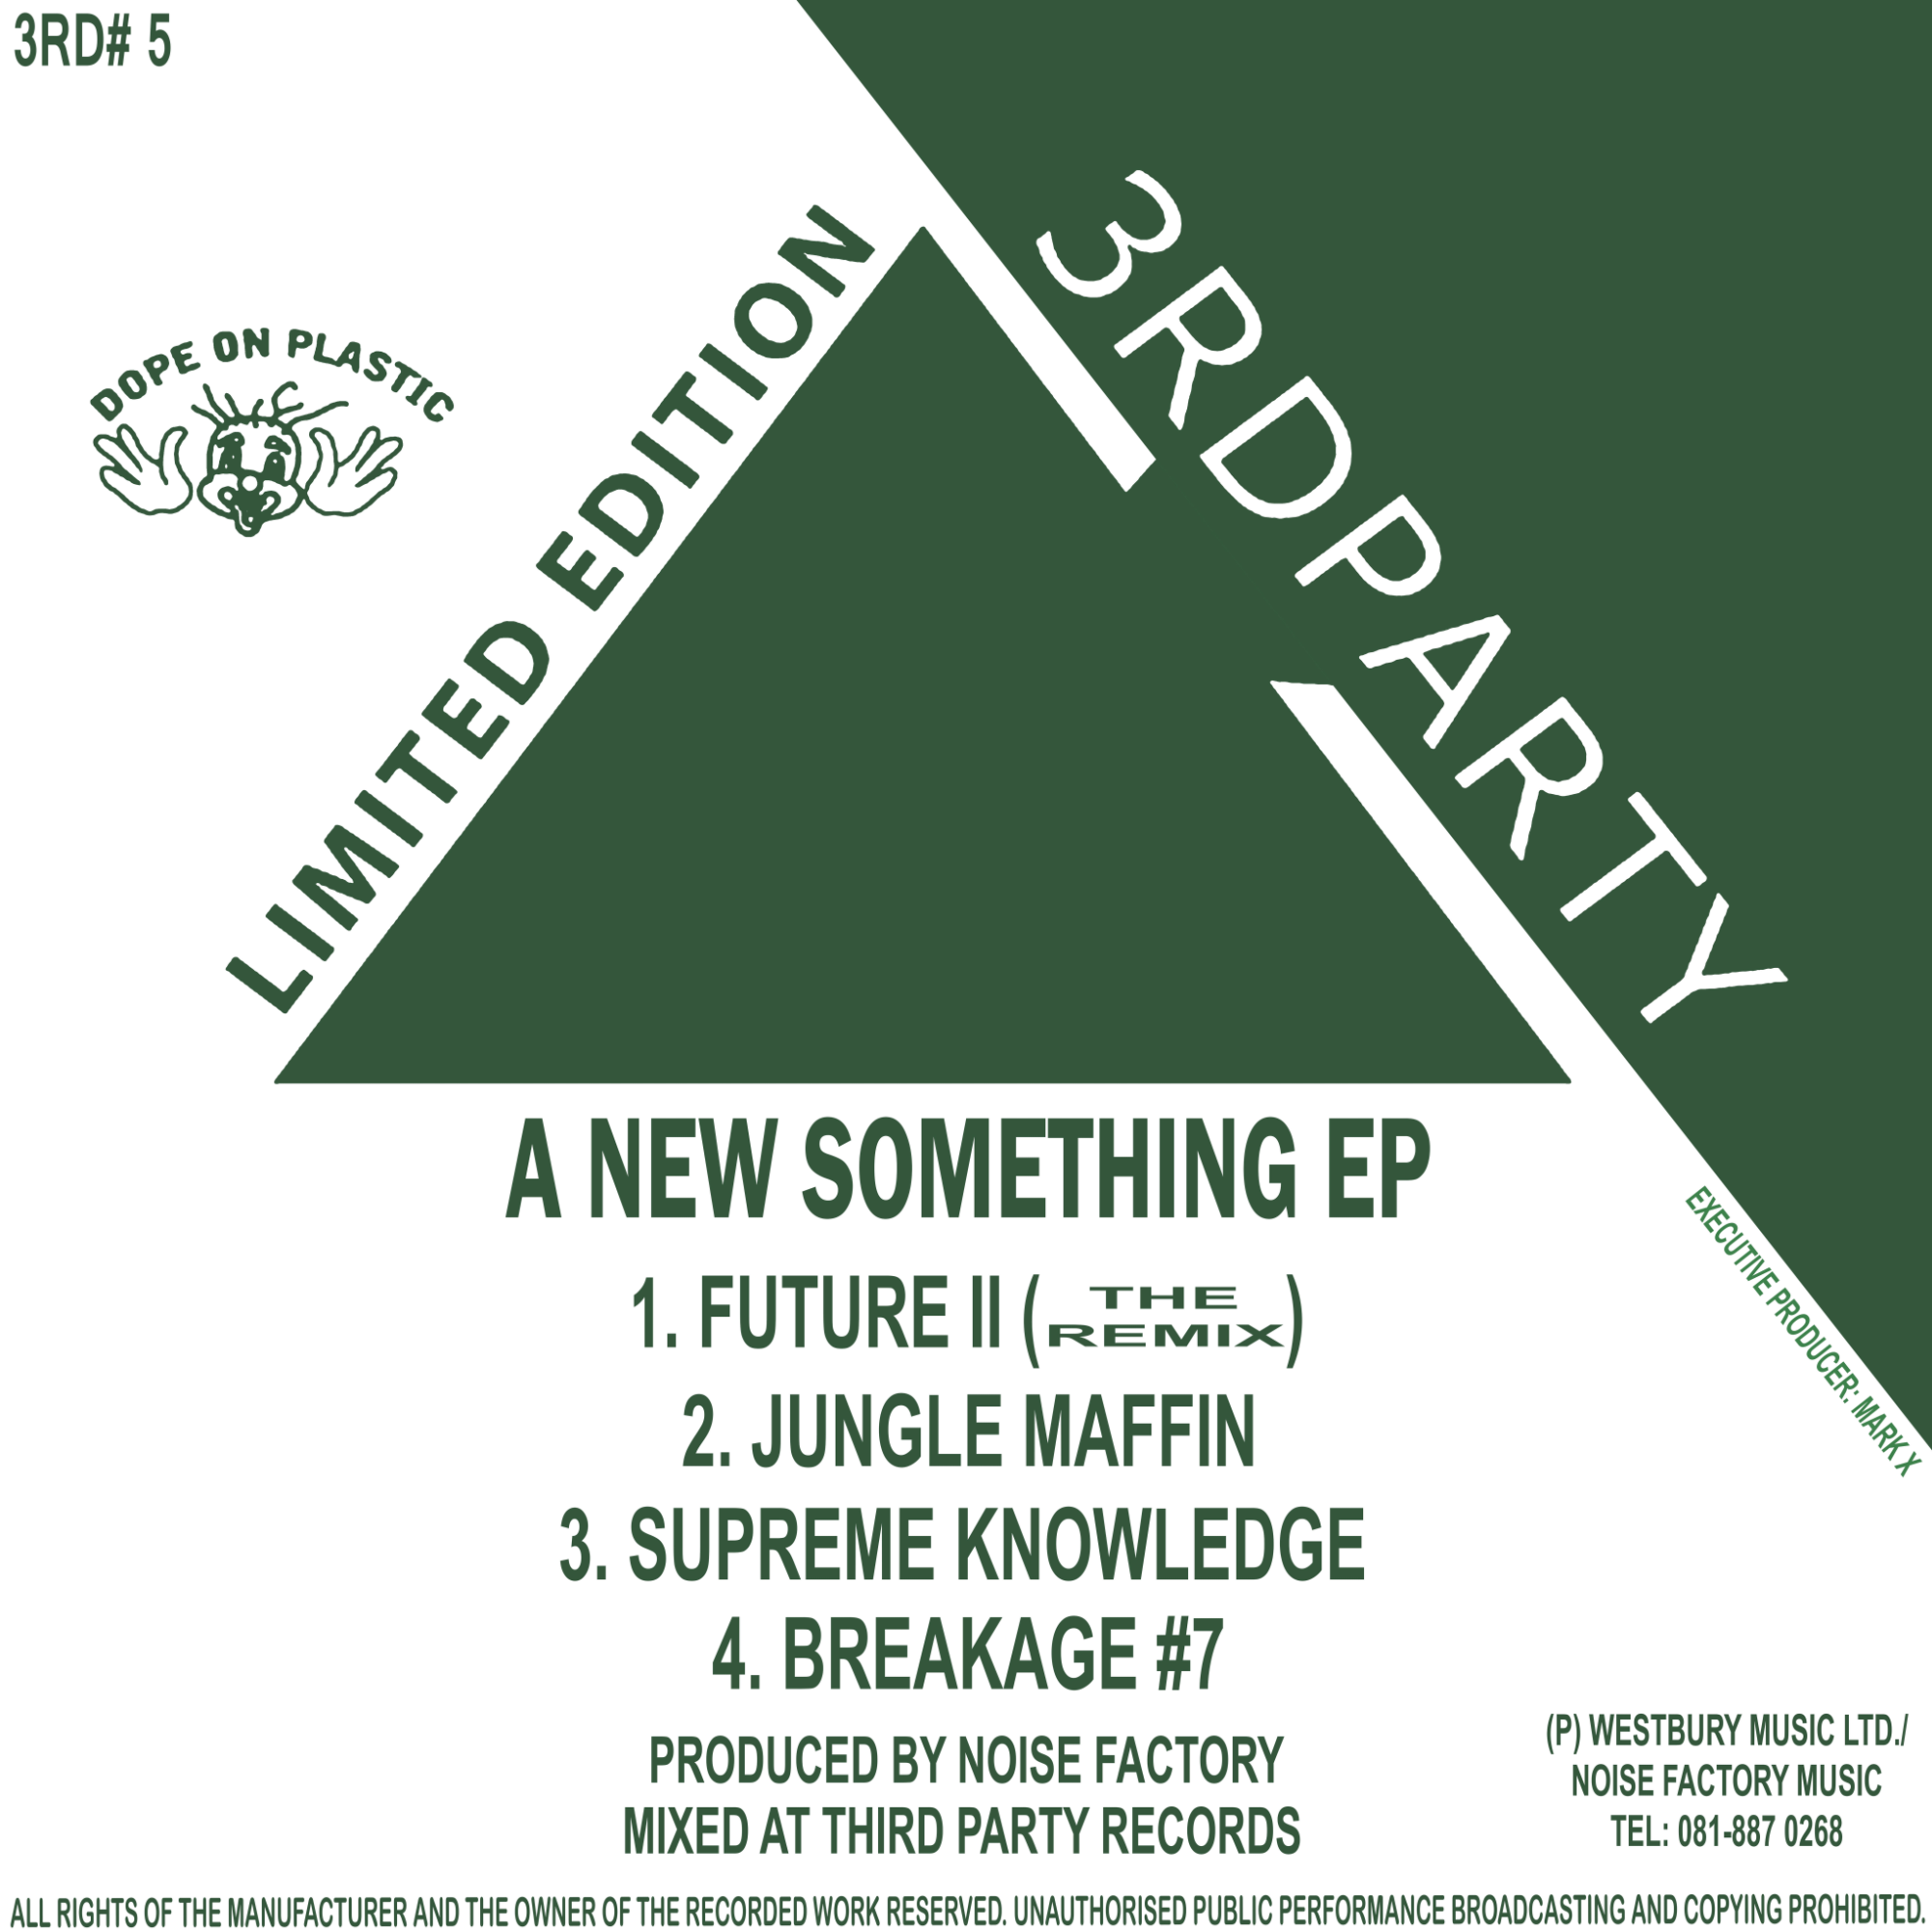 NOISE FACTORY 'A NEW SOMETHING EP' 12" (REISSUE)